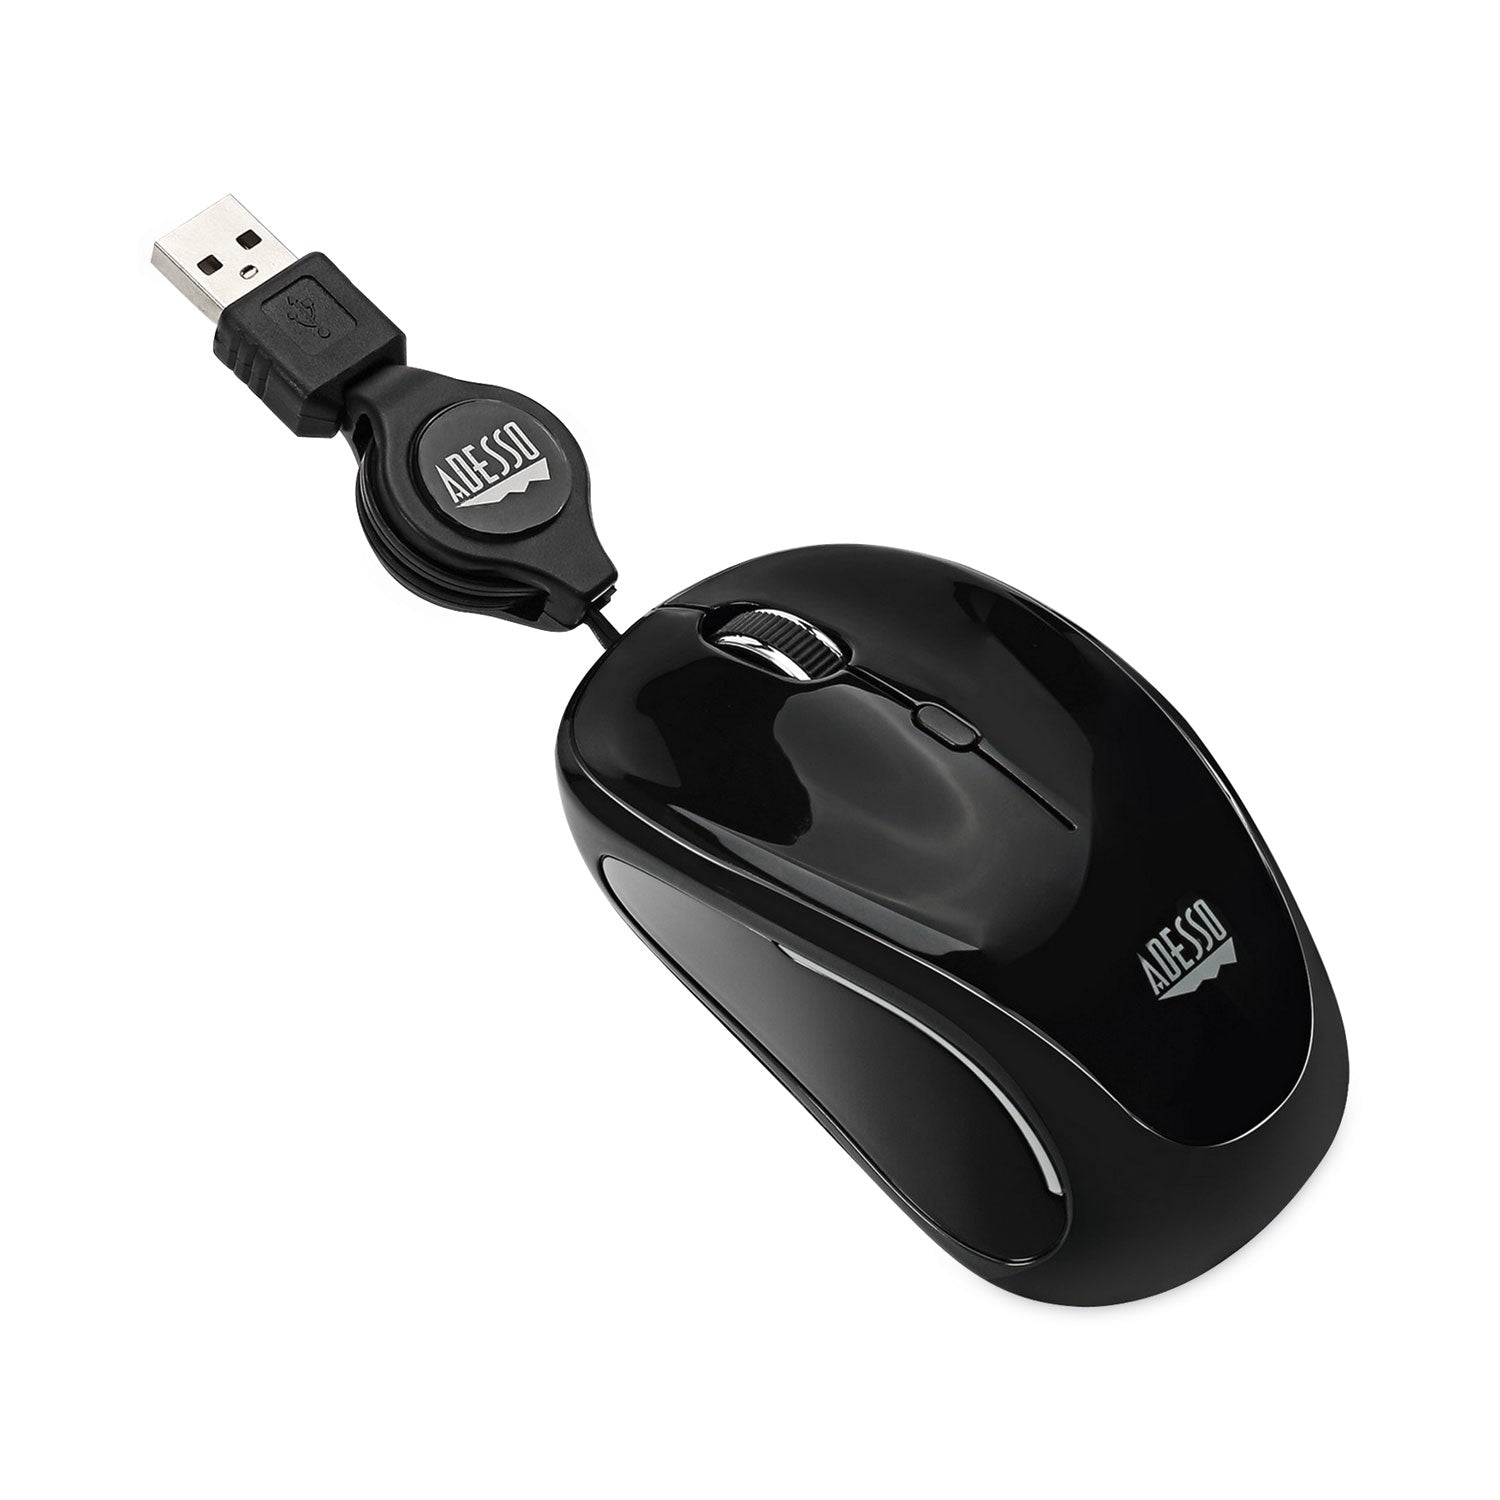 illuminated-retractable-mouse-usb-20-left-right-hand-use-black_adeimouses8b - 2